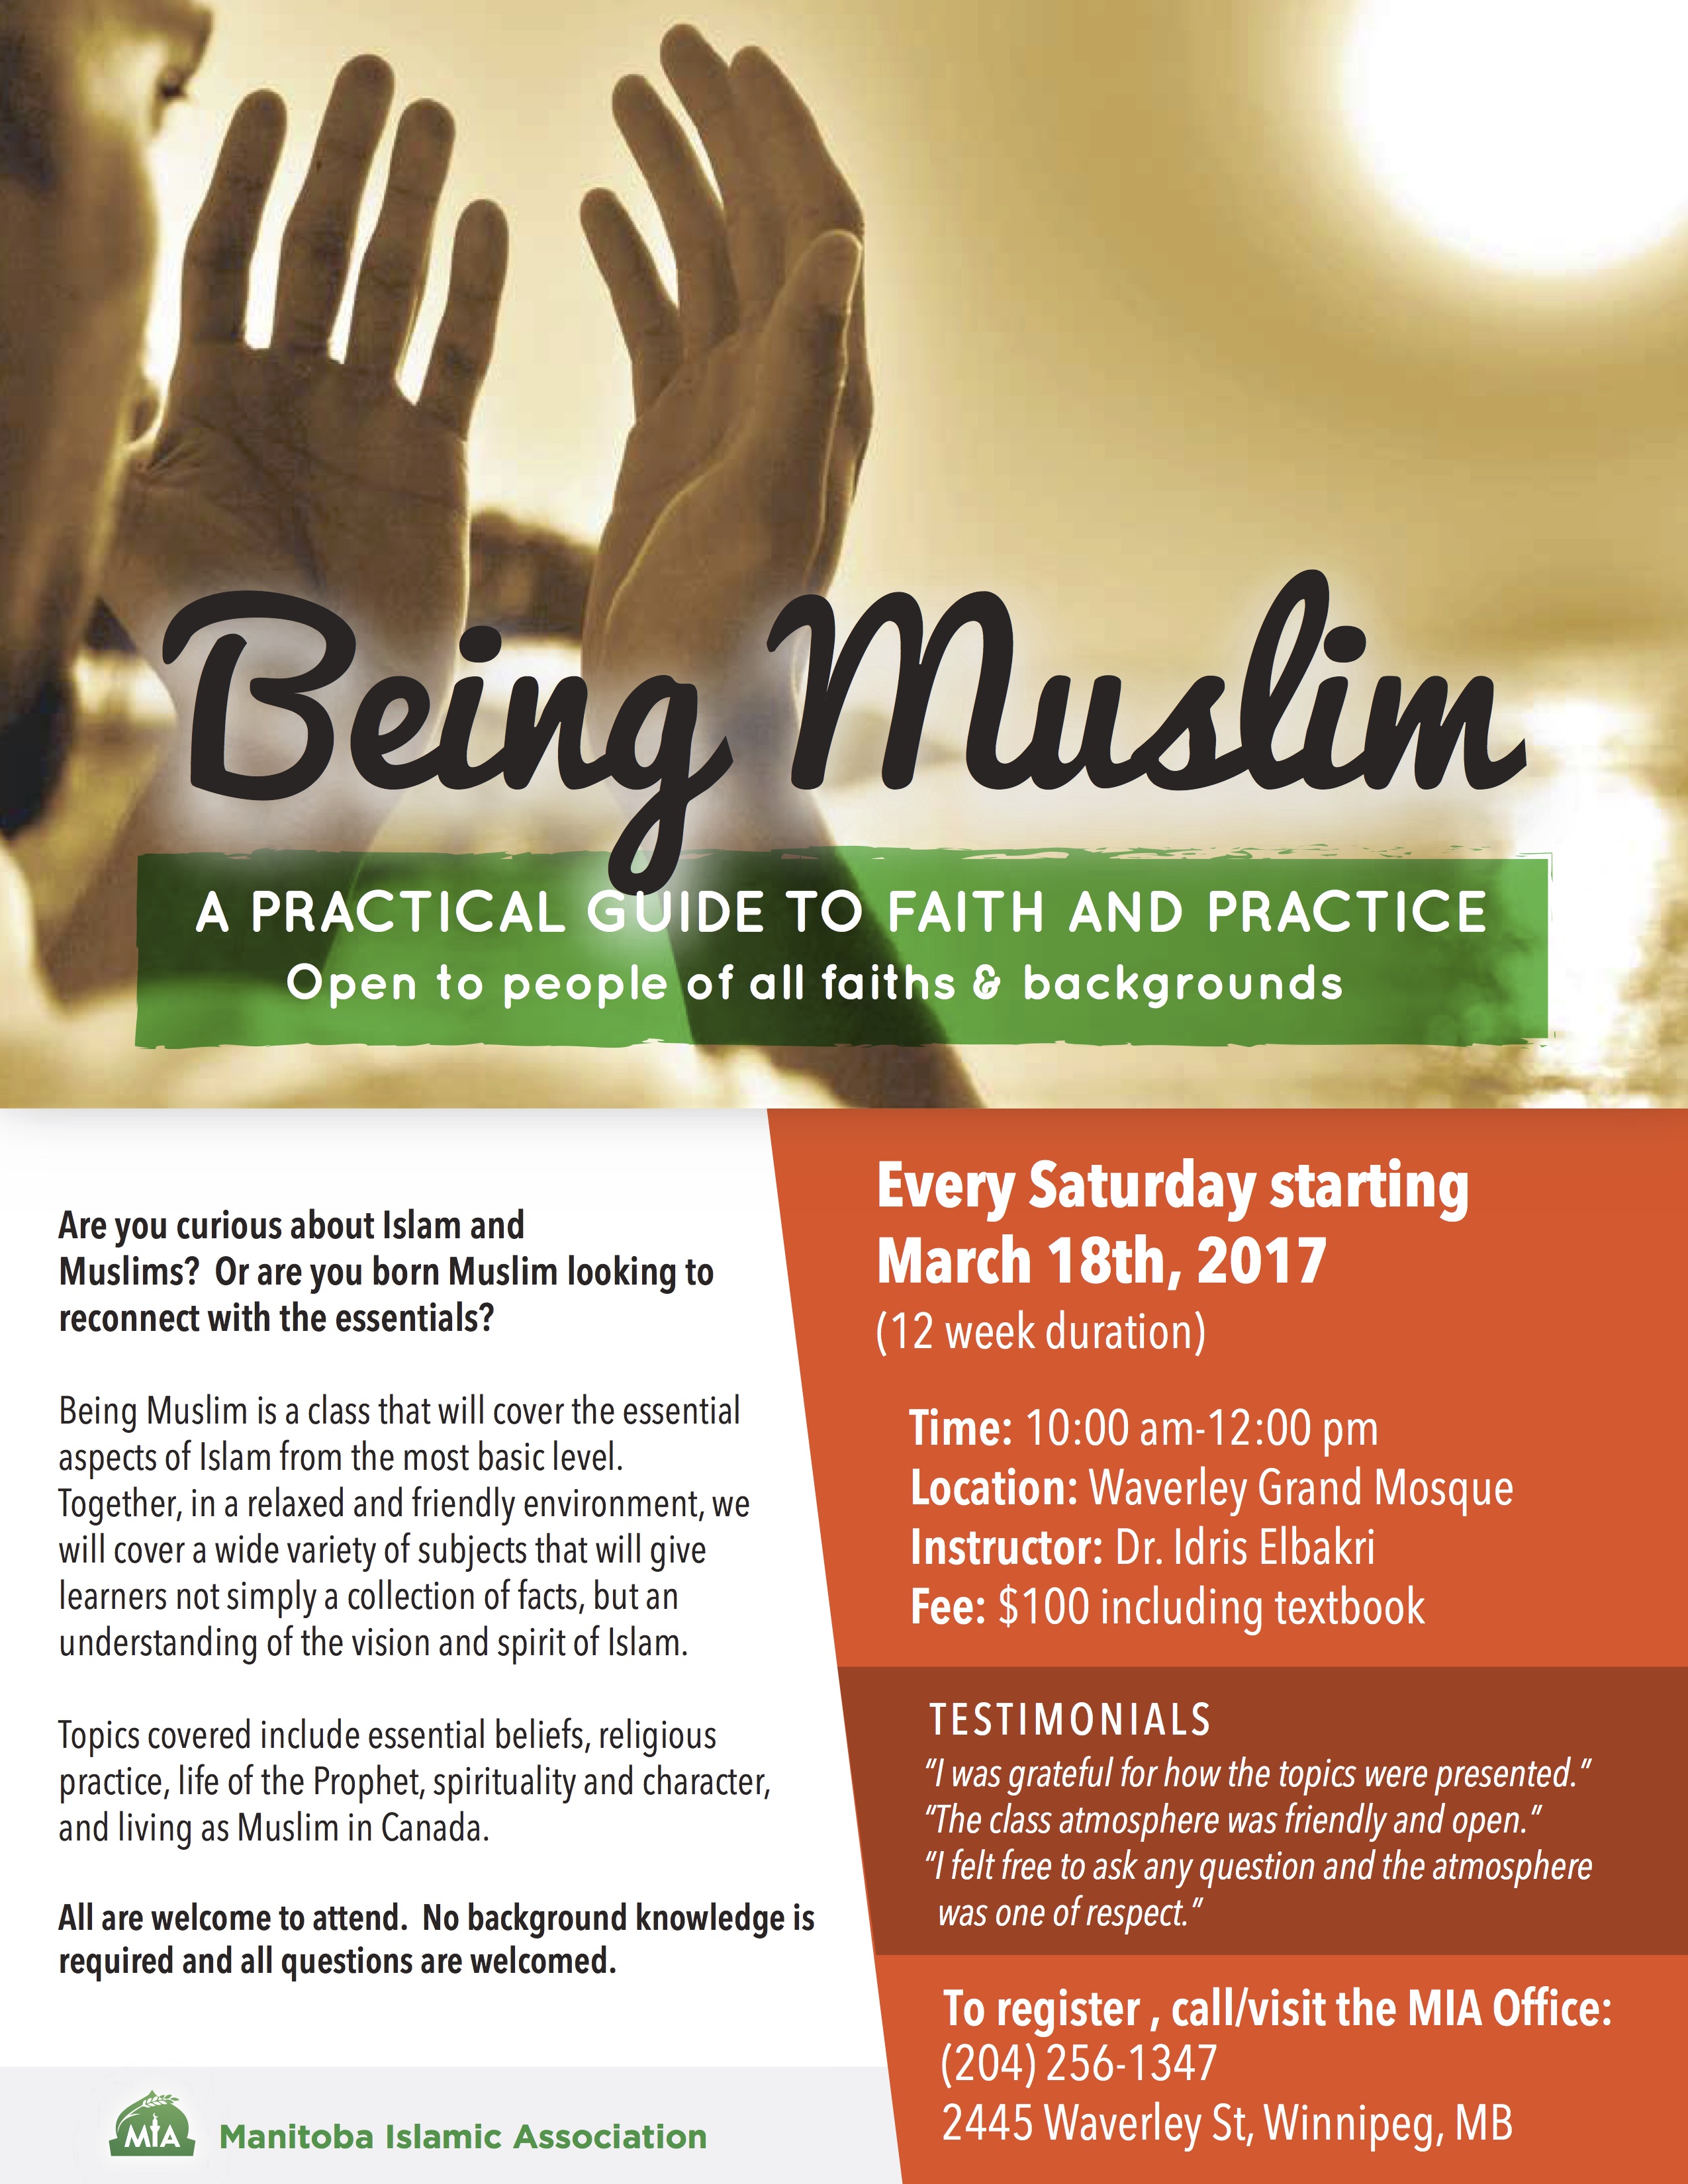 Being Muslim- A Practical Guide to the Faith and Practice 